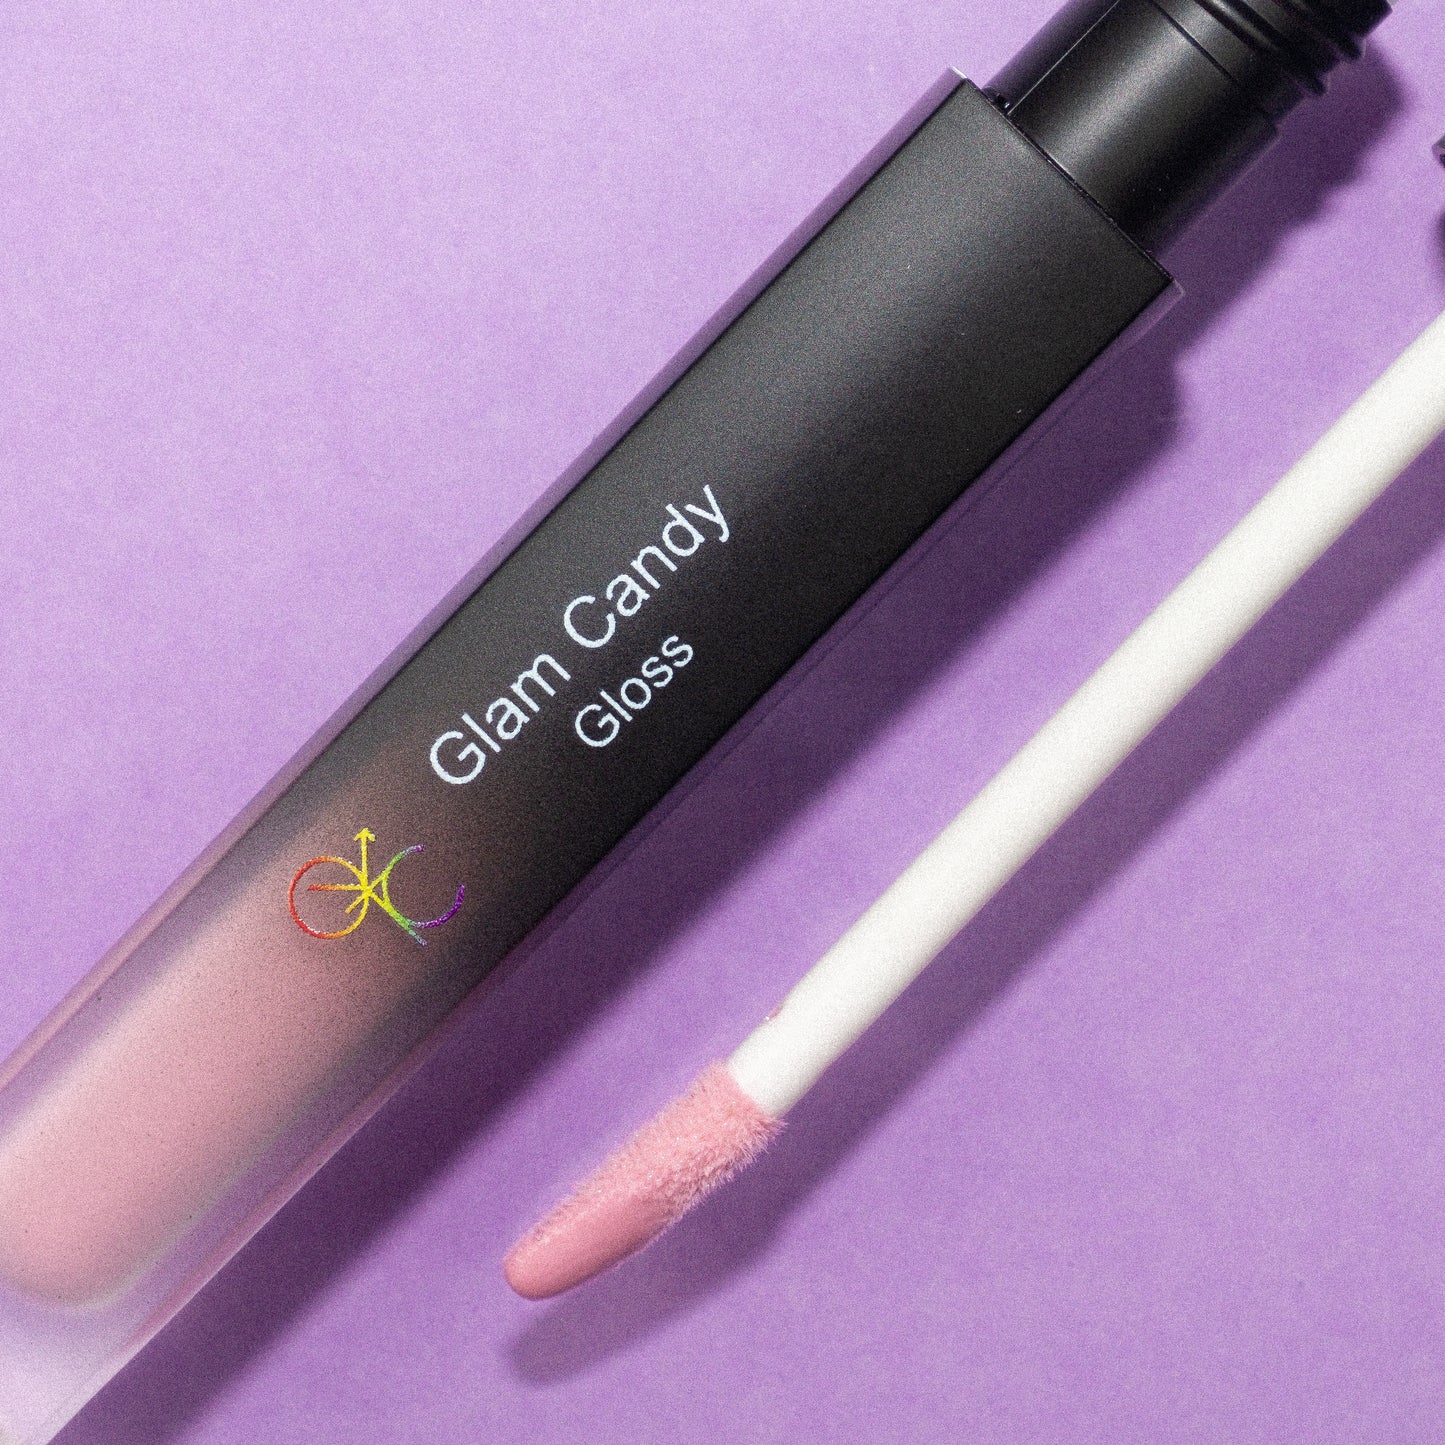 Glam Candy Gloss